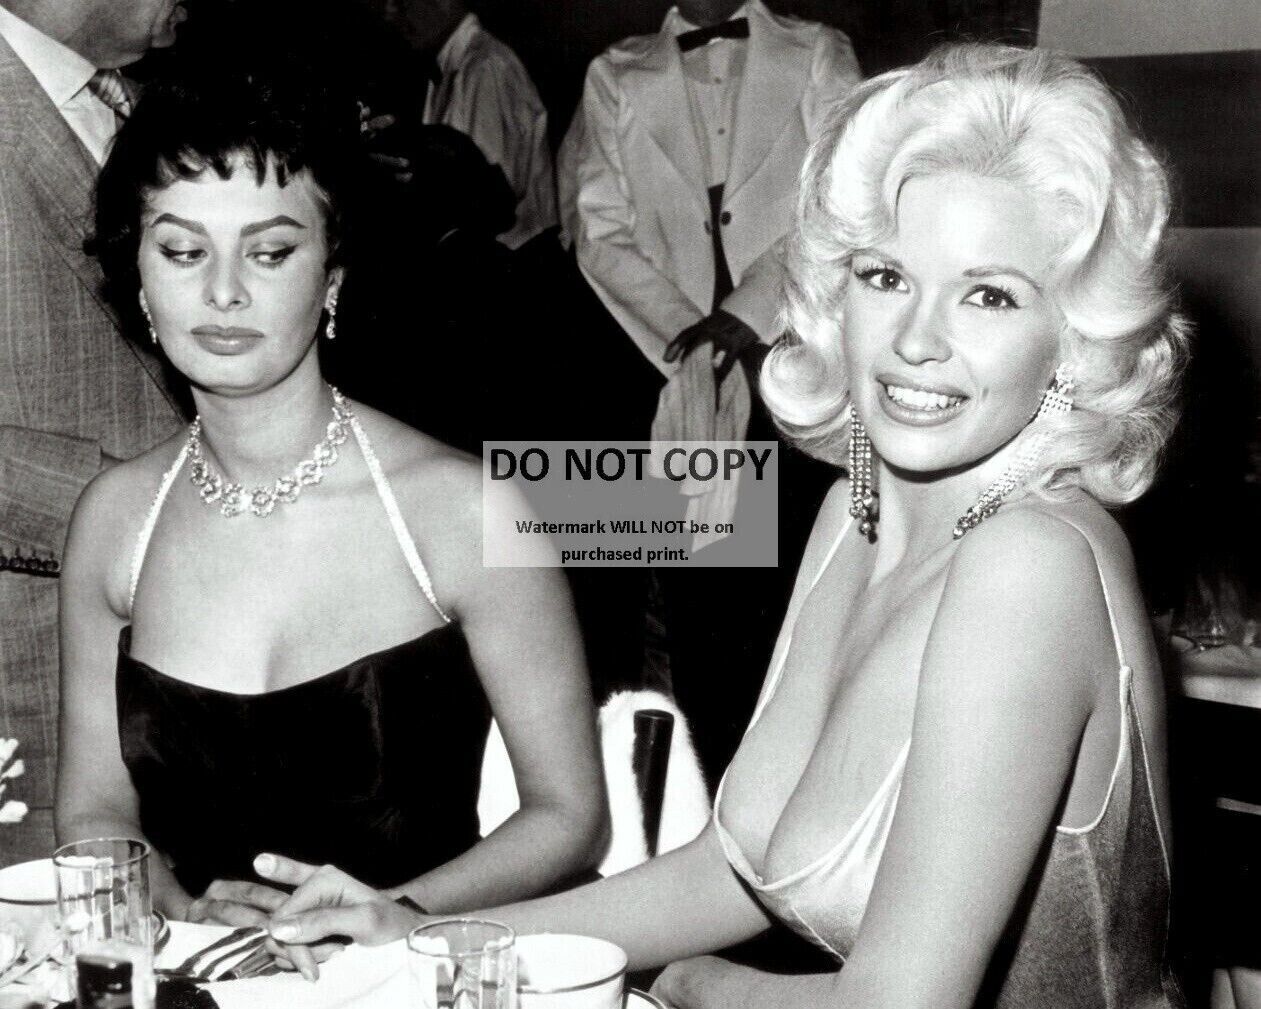 11X14 PUBLICITY PHOTO - SOPHIA LOREN & JAYNE MANSFIELD AT PARTY IN 1957 (LG-107)